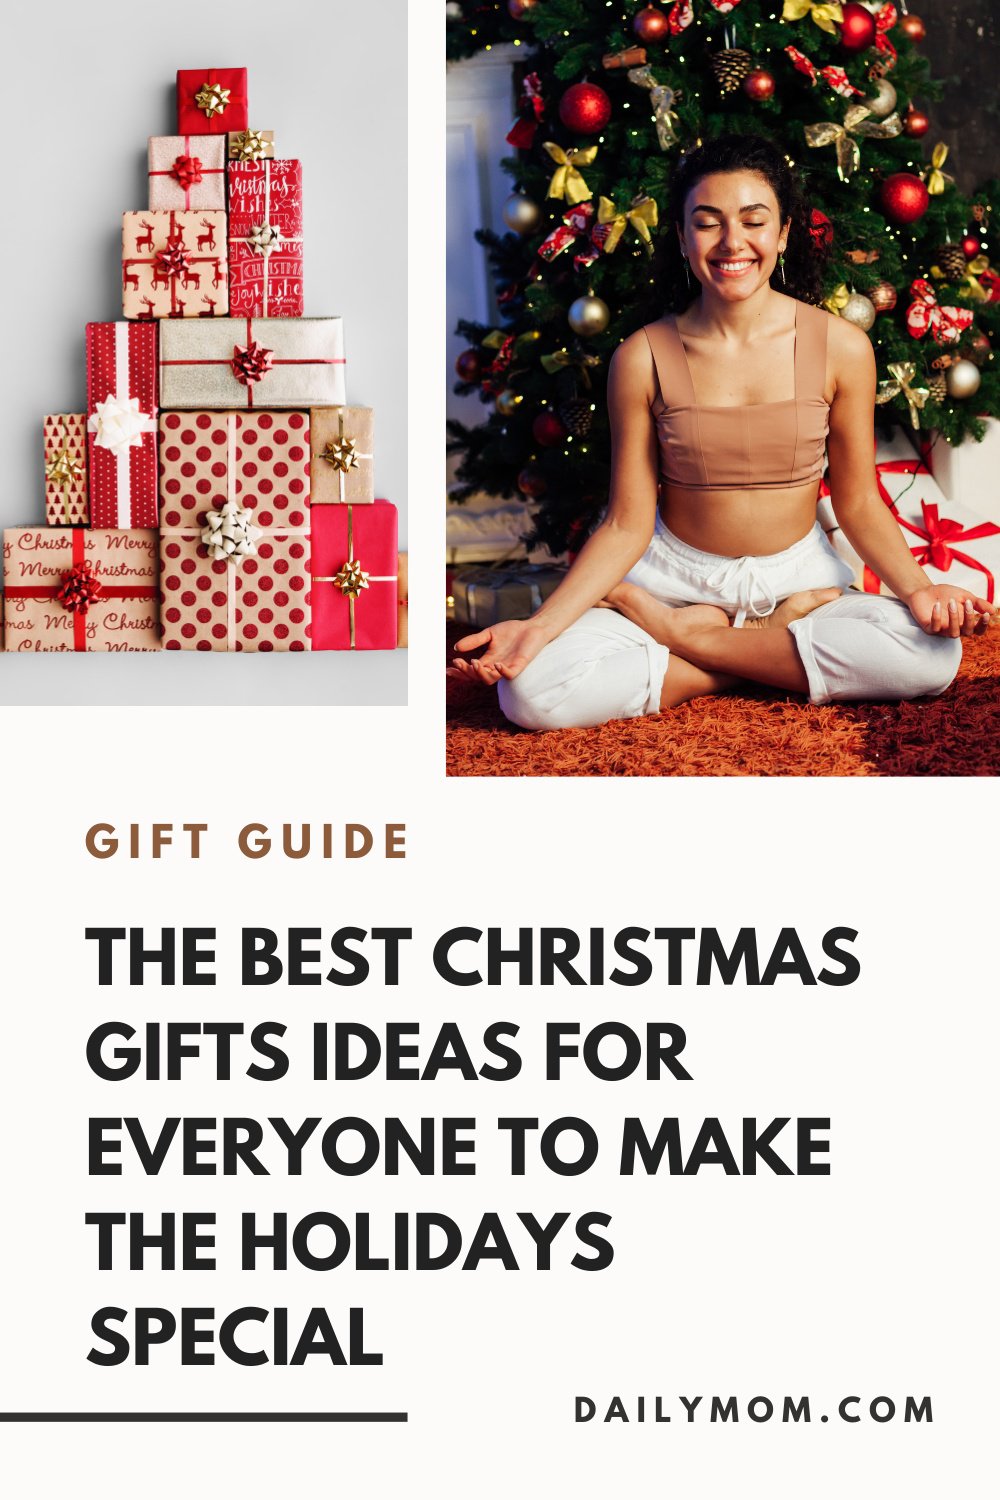 18 Of The Best Christmas Gifts Ideas For Everyone To Make The Holidays Special 42 Daily Mom, Magazine For Families